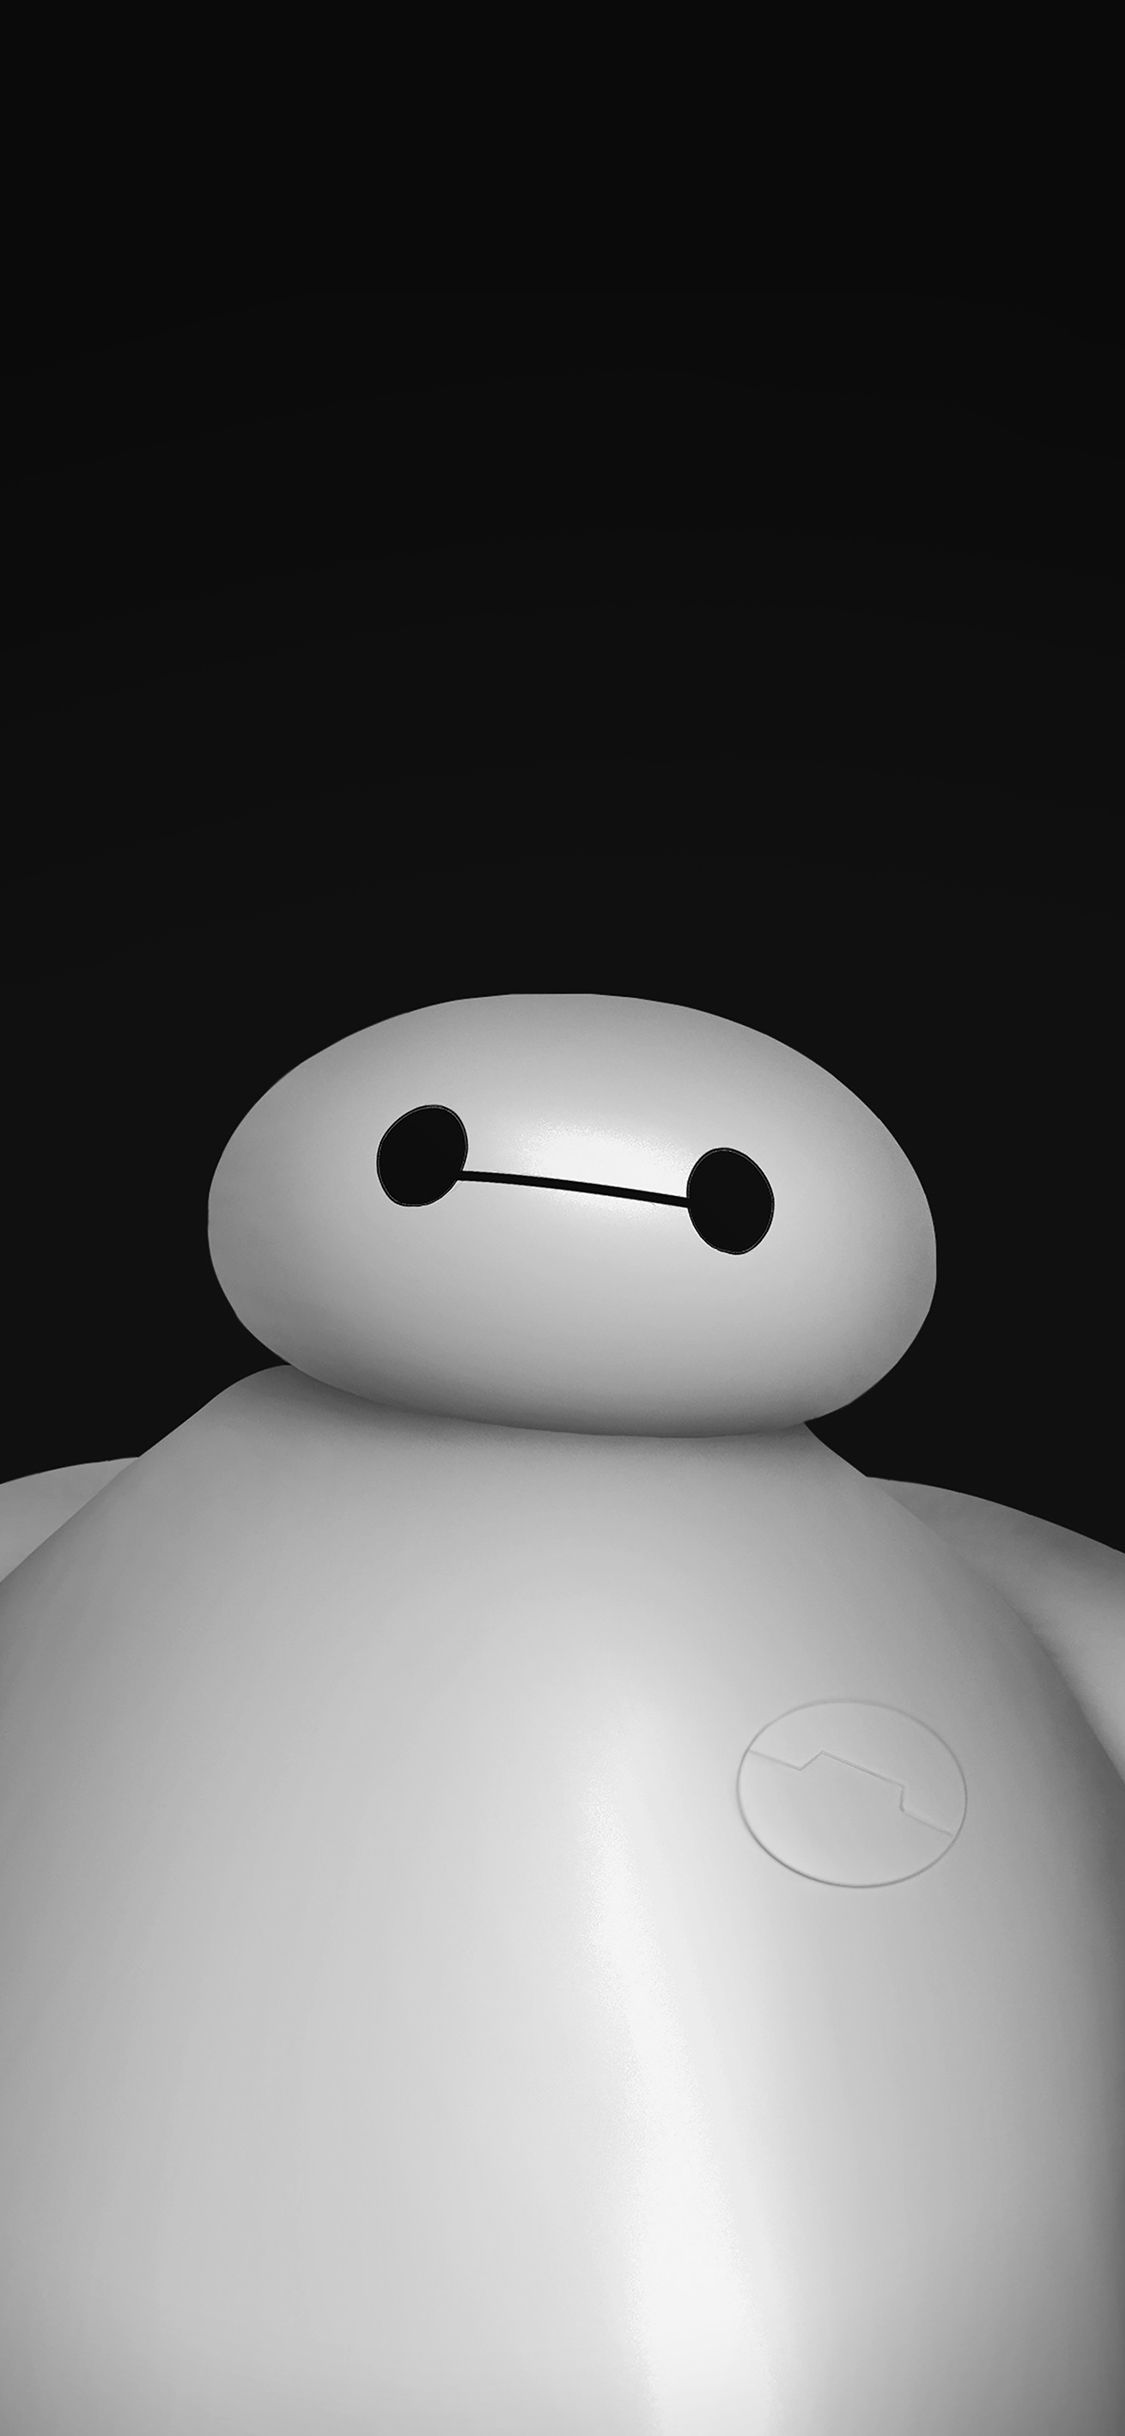 Baymax Iphone Wallpapers on WallpaperDog